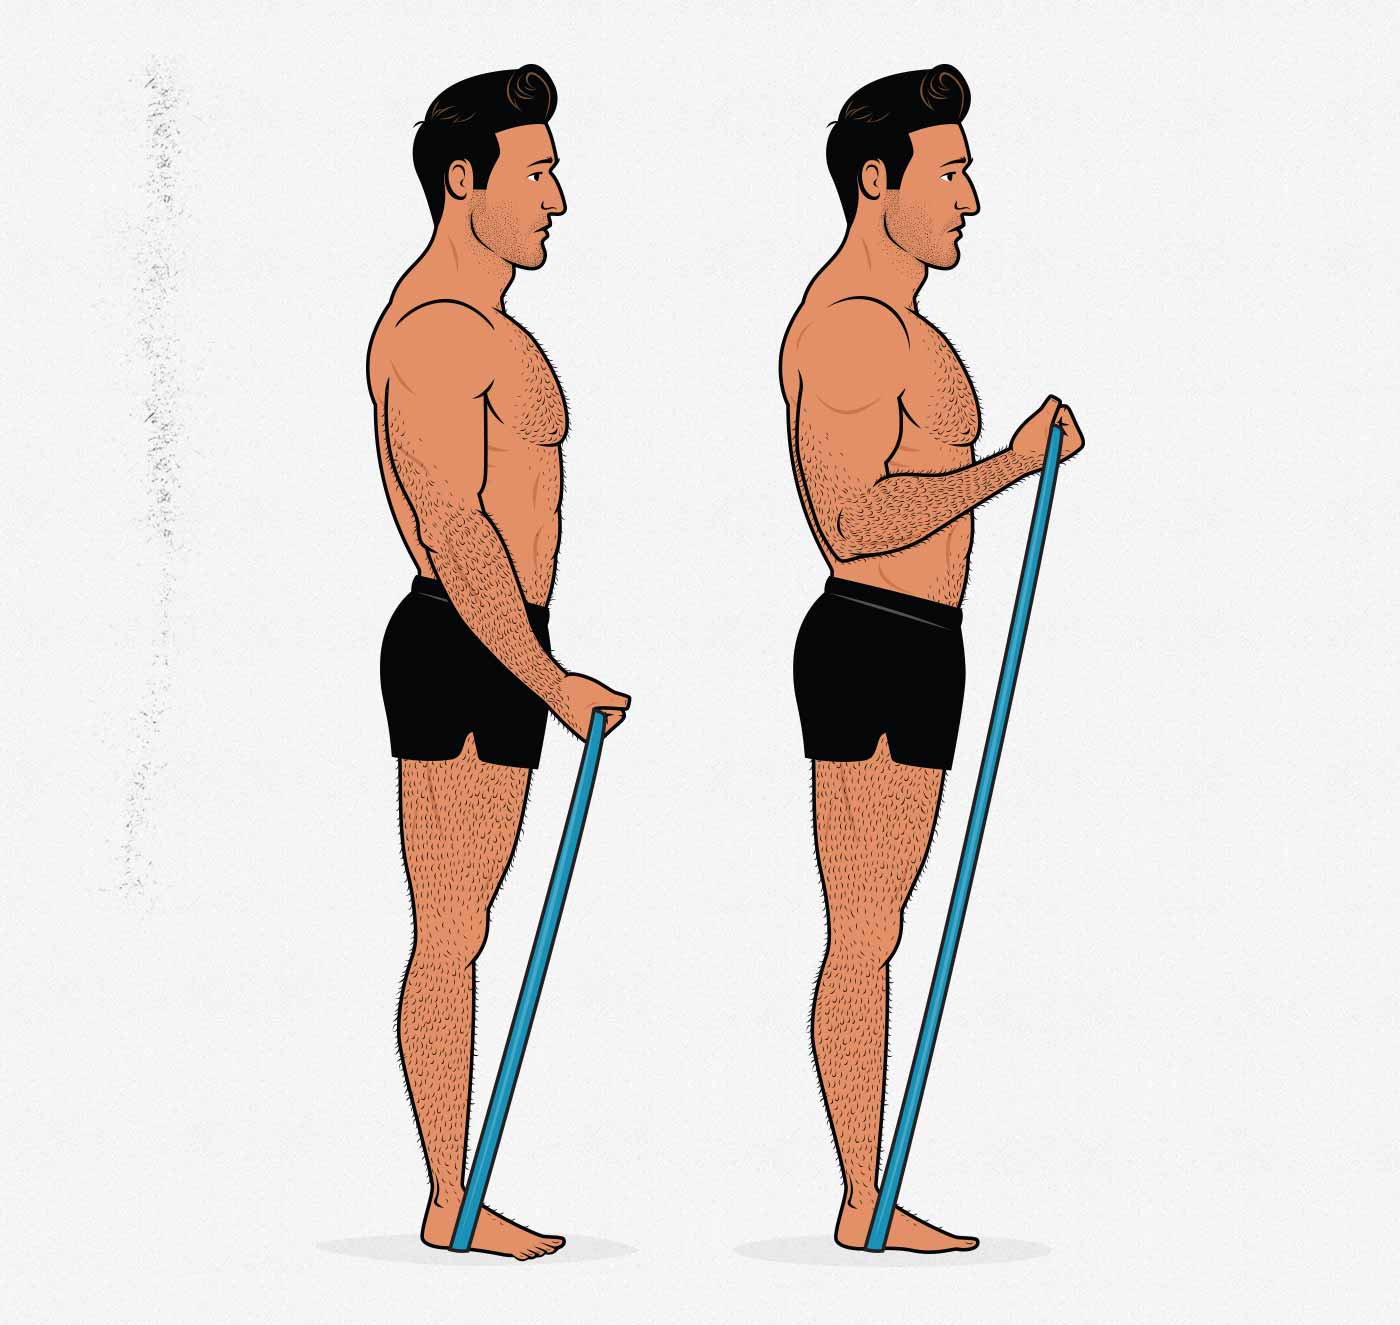 Illustration of a muscular man doing biceps curls with resistance bands.